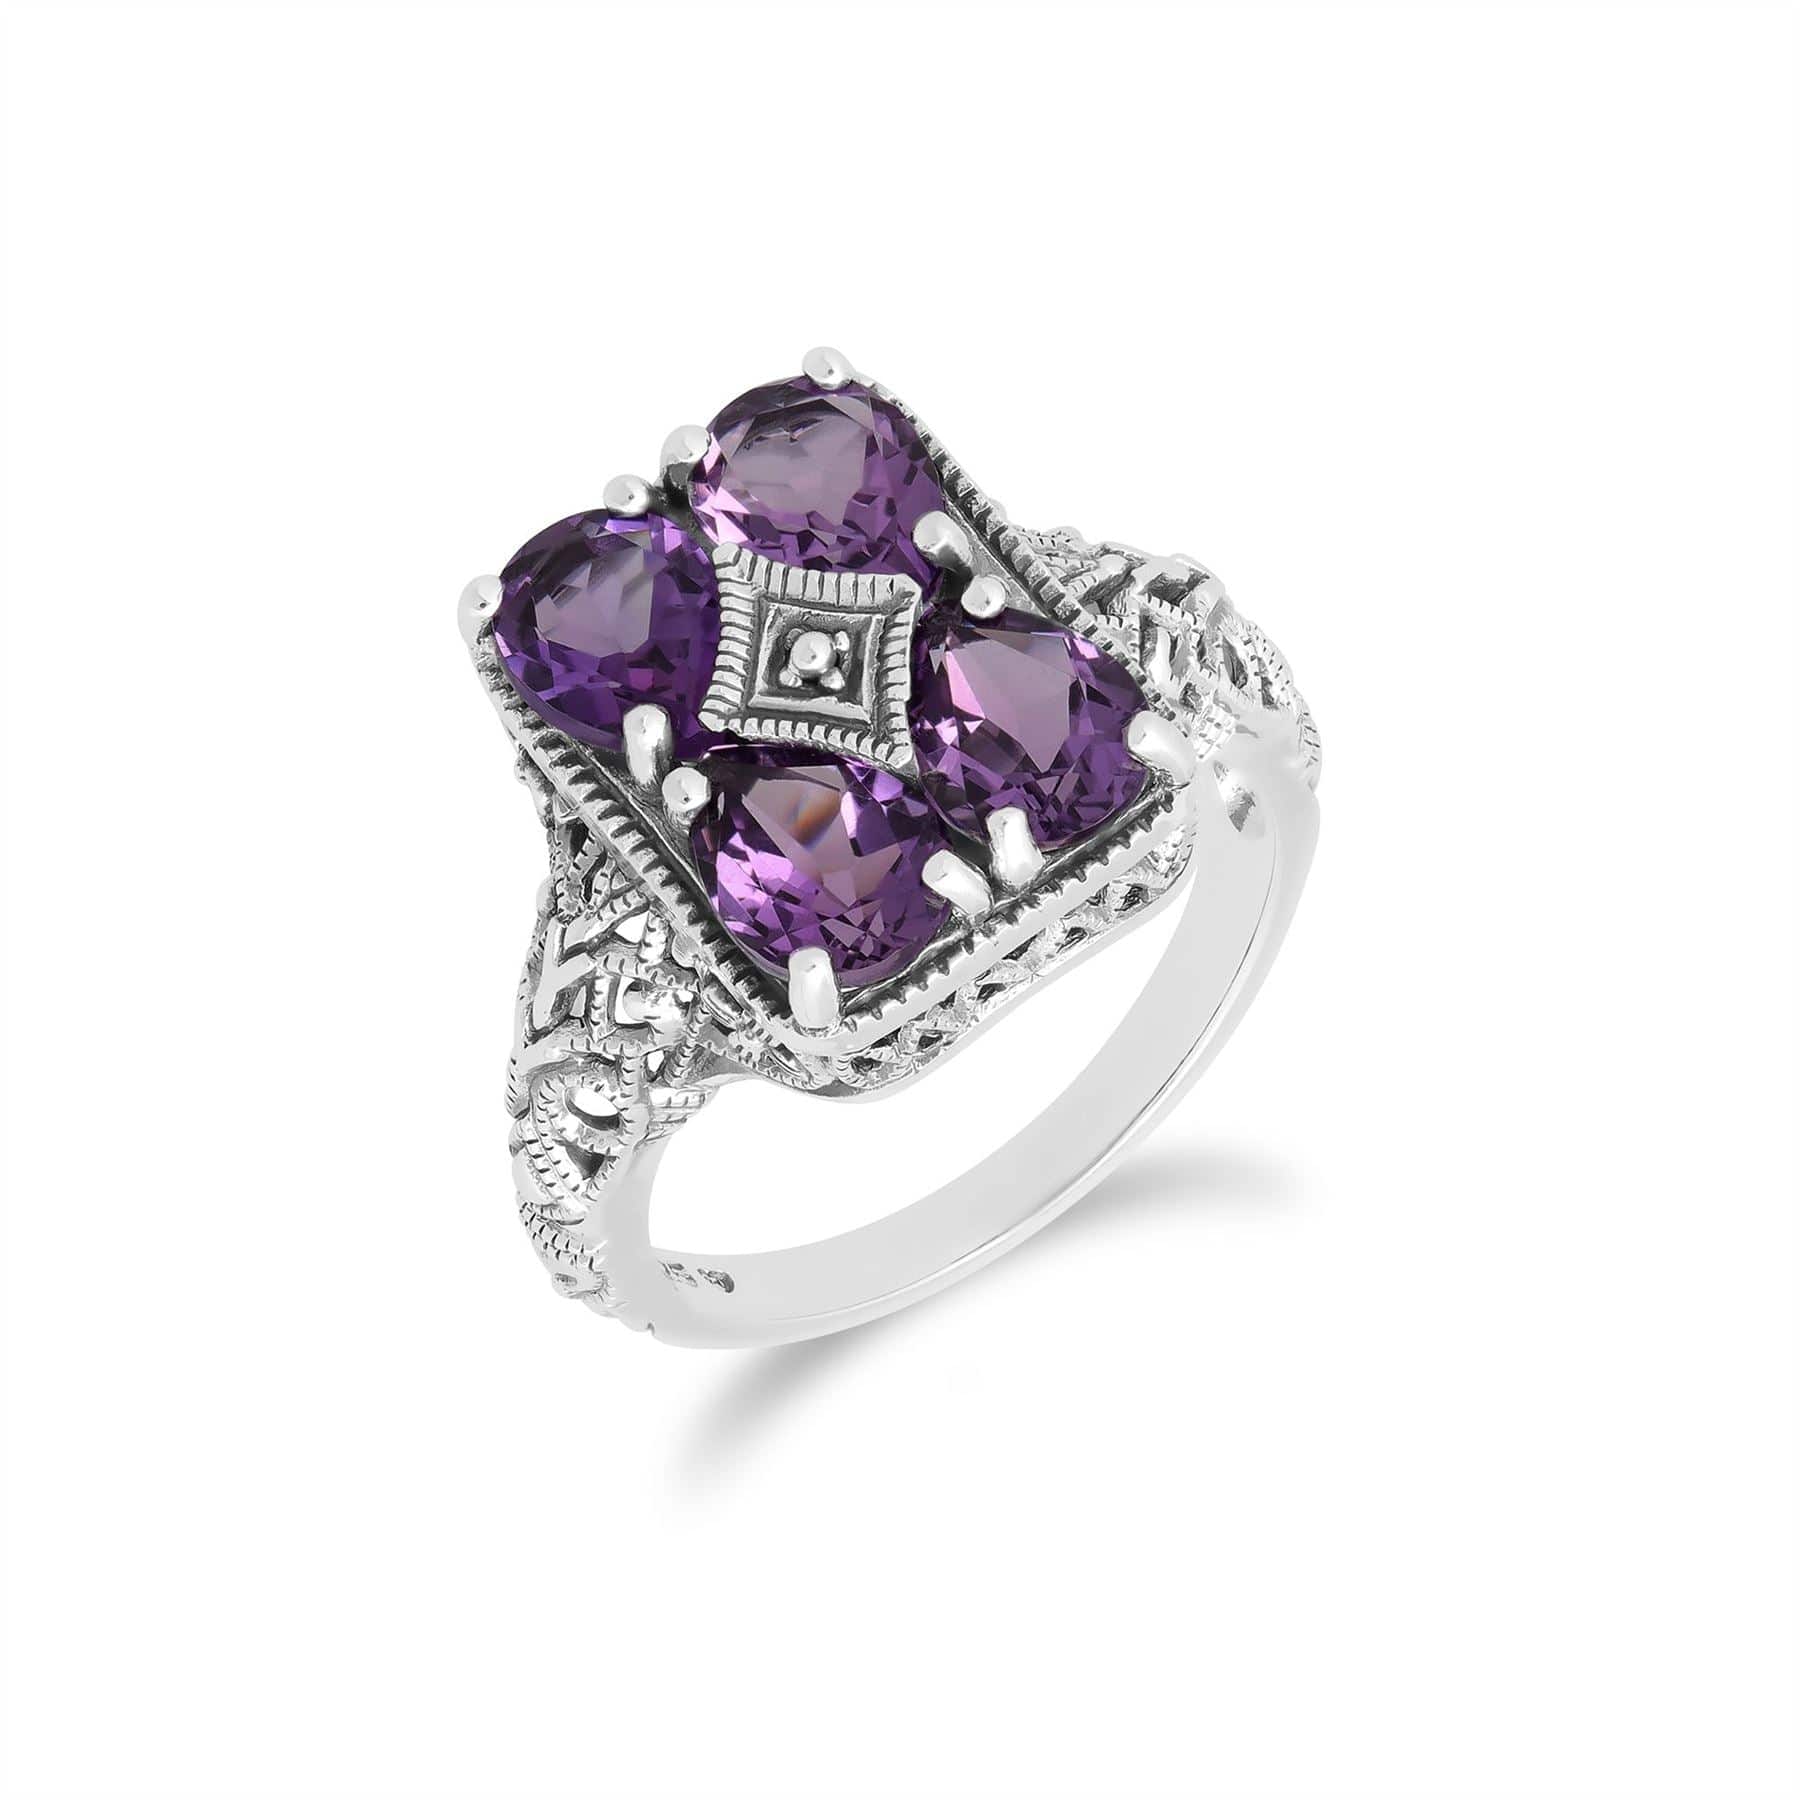 241R031002925 Art Nouveau Inspired Amethyst Statement Ring in 925 Sterling Silver 1